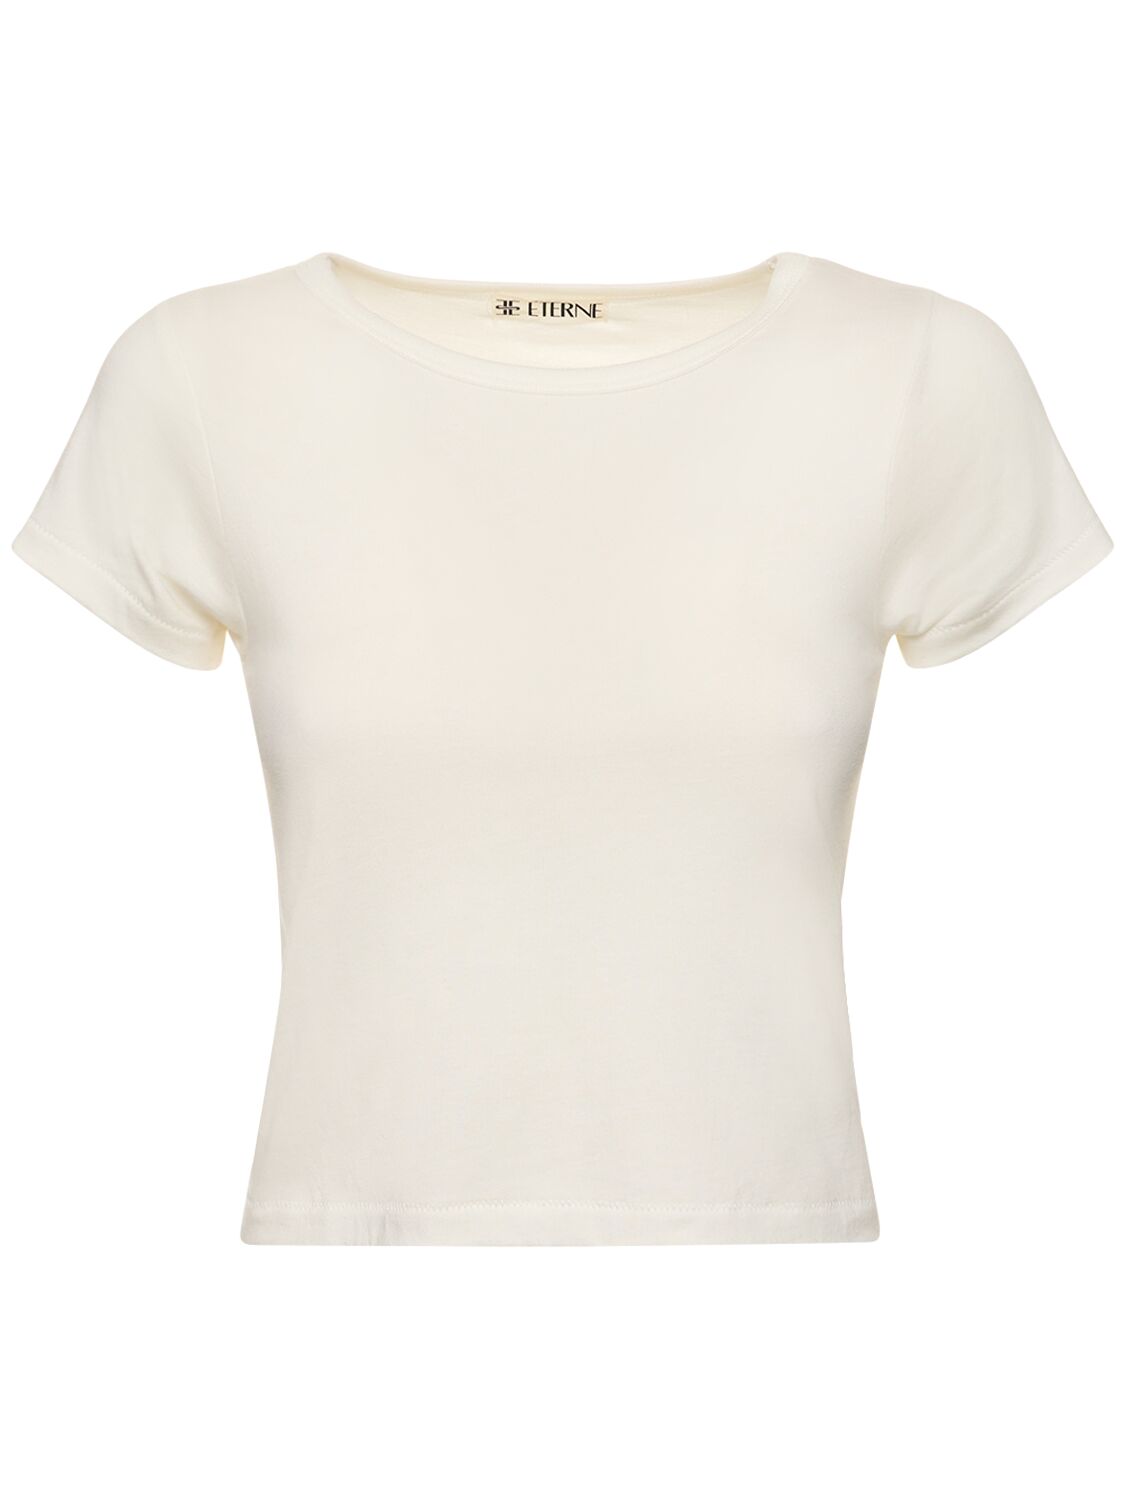 Image of Short Sleeve Stretch Cotton T-shirt